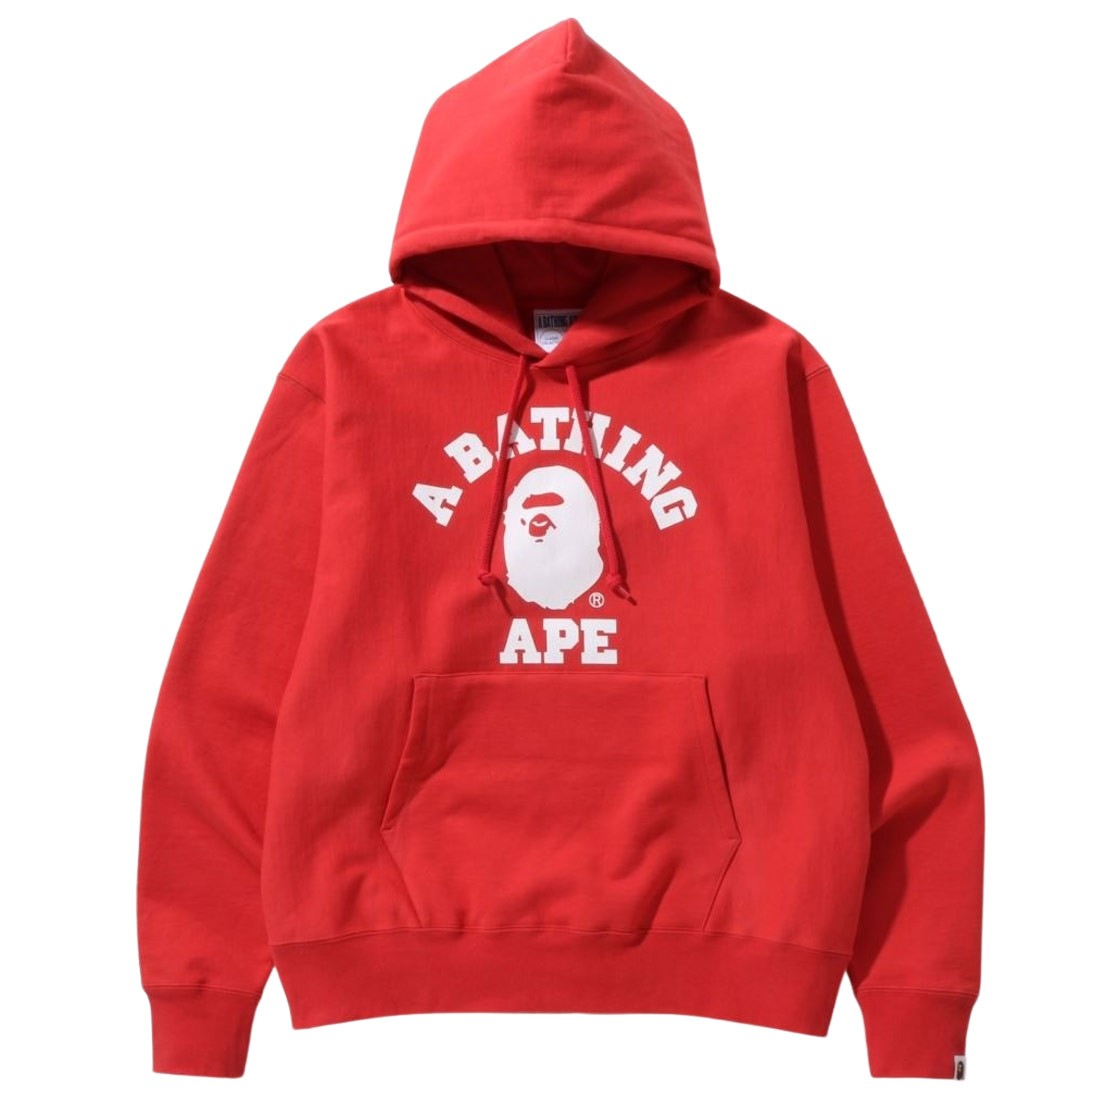 A Bathing Ape Men Classic College Relaxed Fit Pullover Hoodie (red)